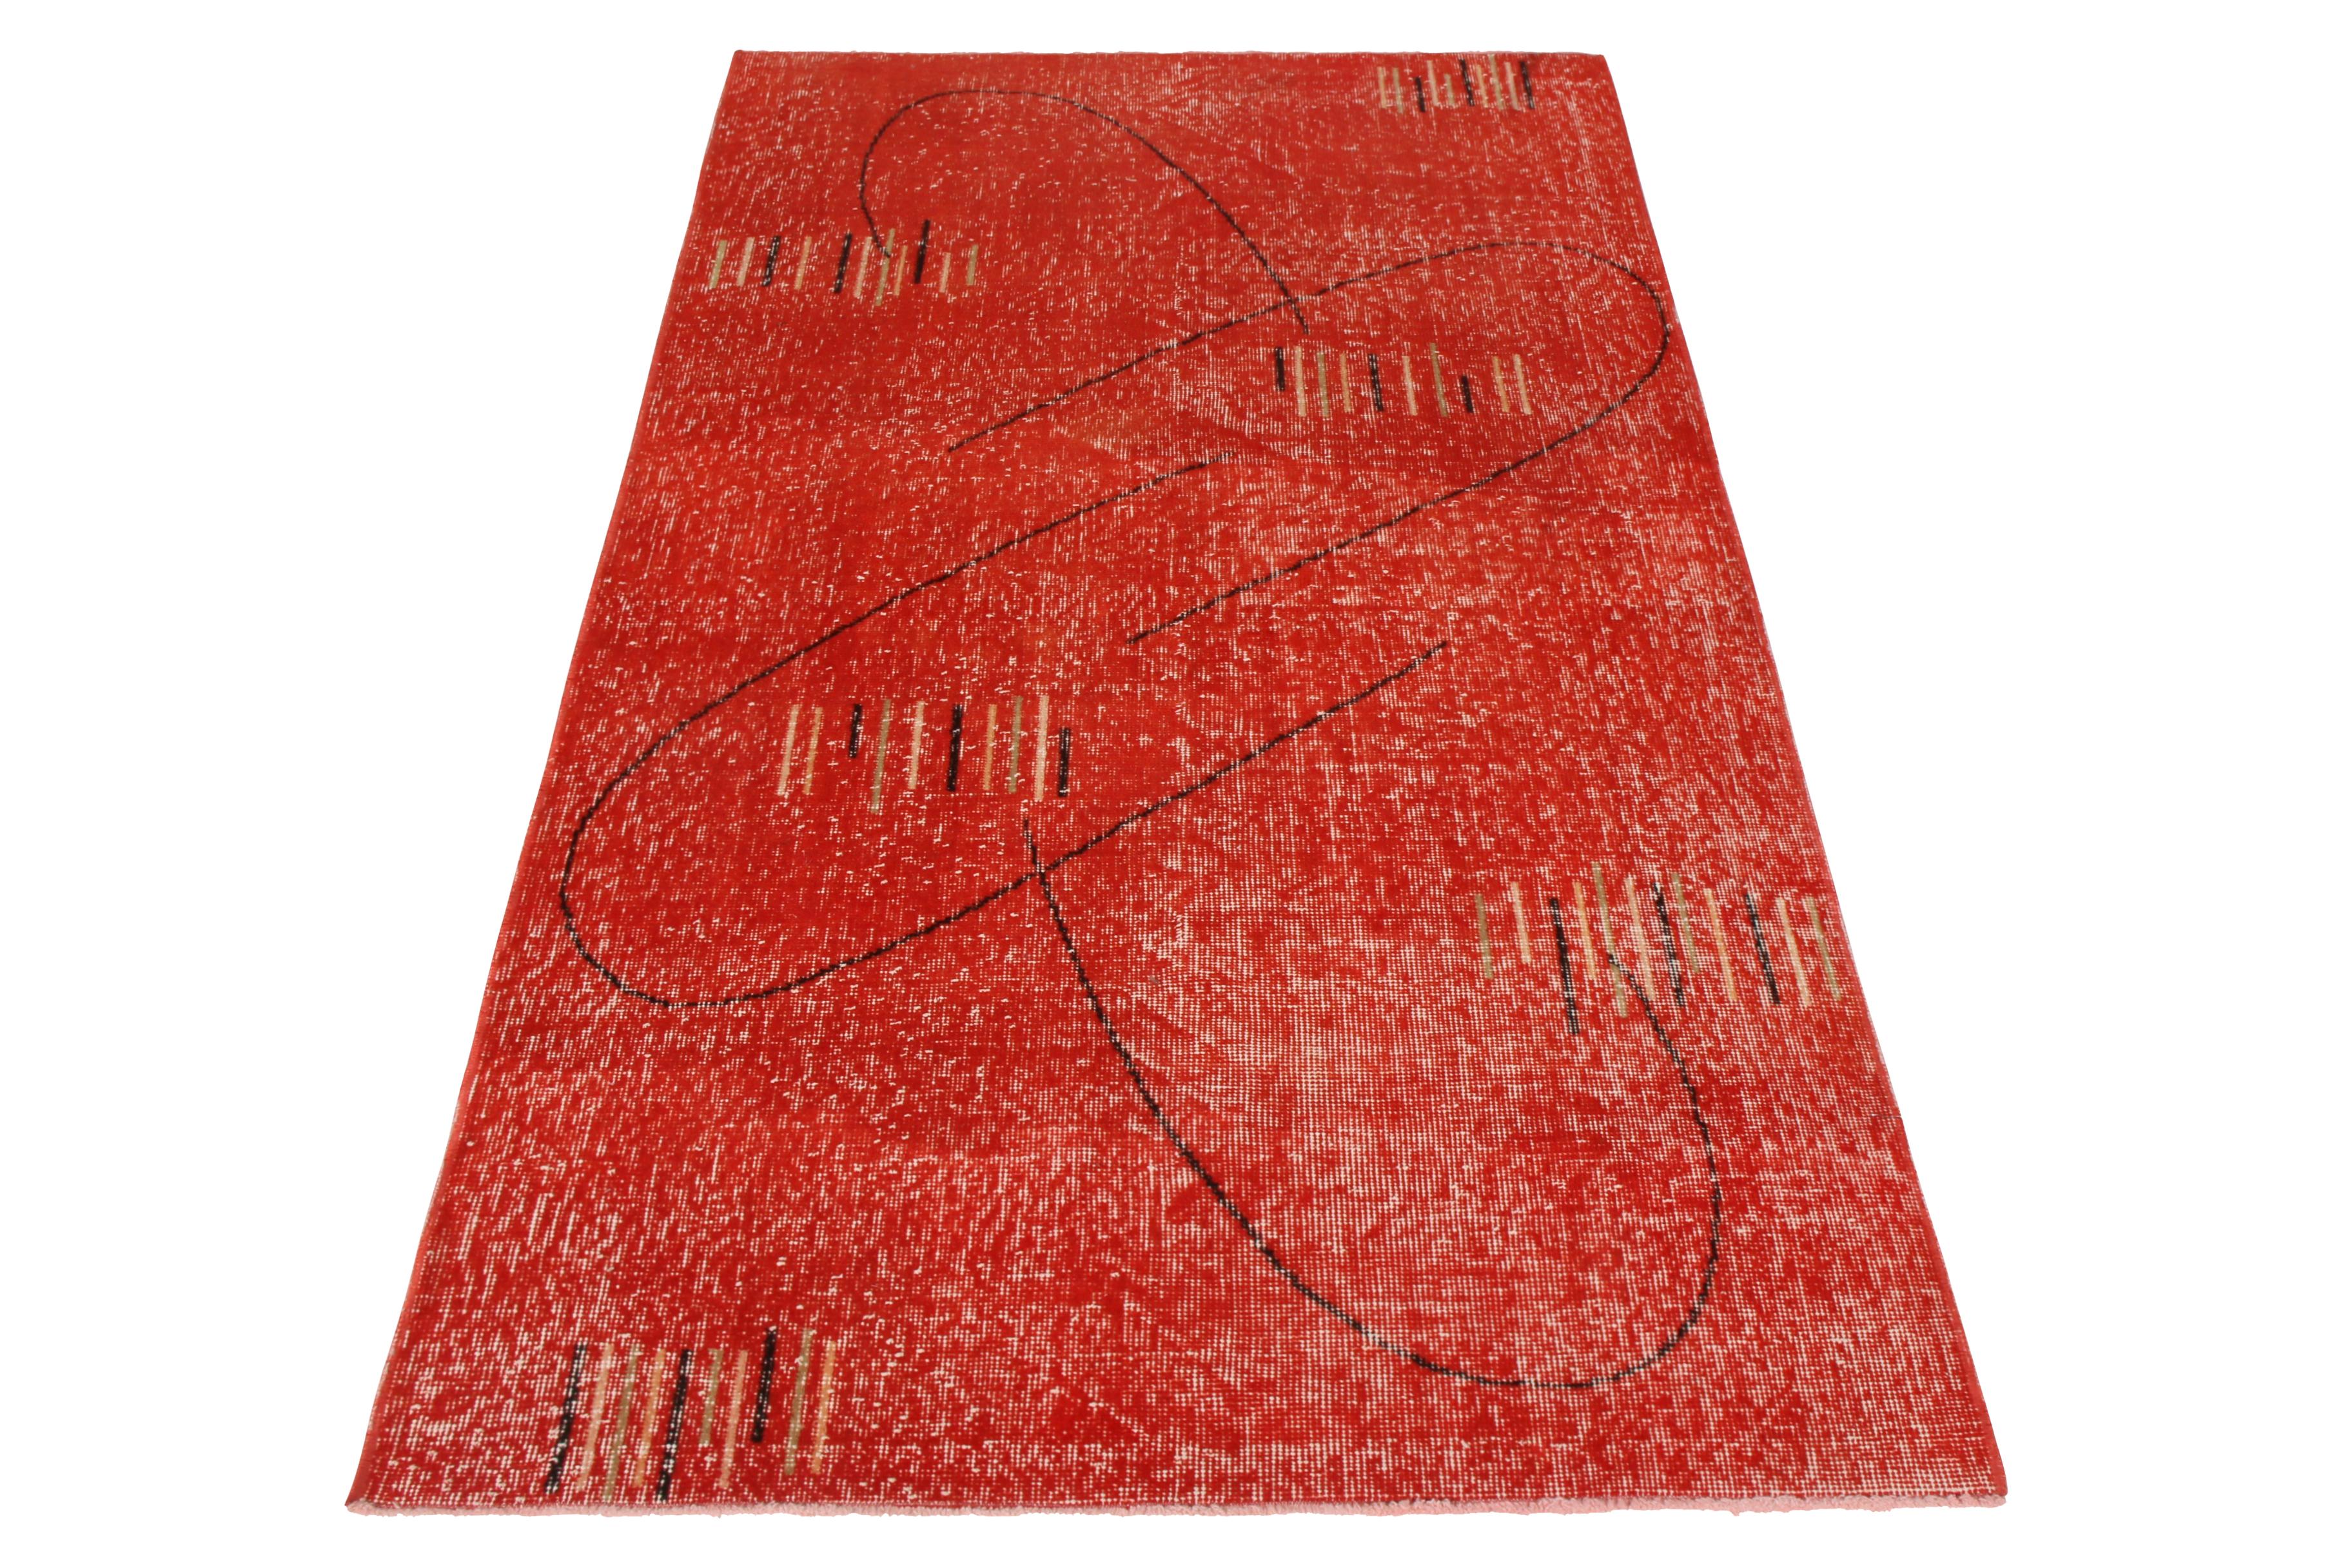 Hand knotted in Turkey originating between 1960-1969, this vintage midcentury wool rug joins Rug & Kilim’s midcentury Pasha collection celebrating Turkish icon Zeki Müren with hand picked favorites from the period. Among the most unique, distinct